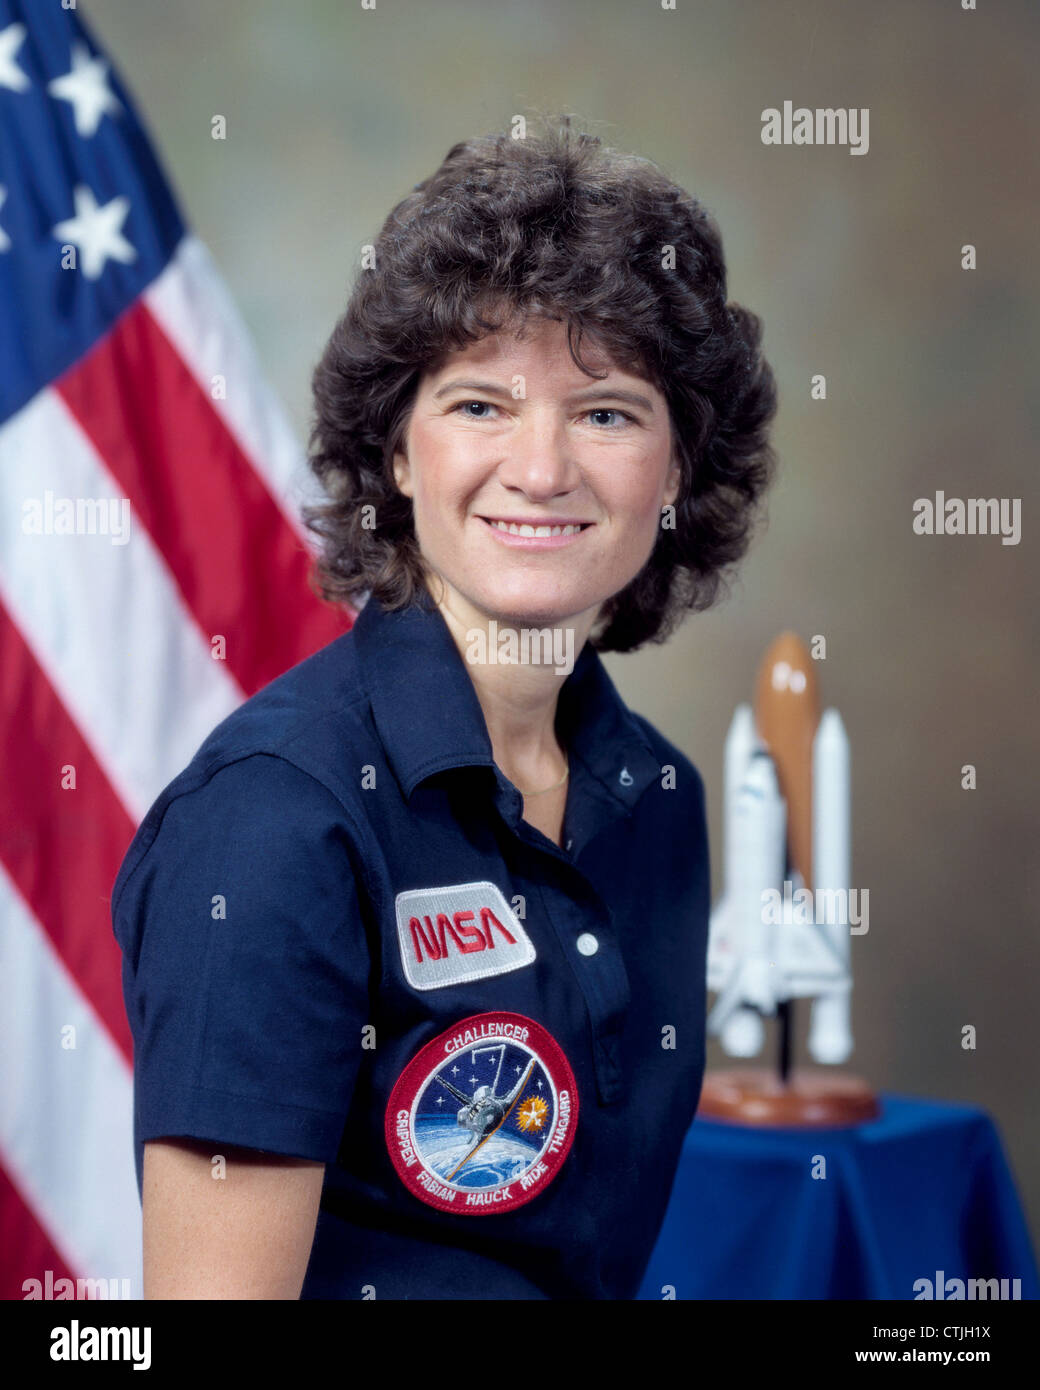 NASA astronaut Sally K. Ride member of the Shuttle Challenger STS-7 crew and the first U.S women in space in her official portrait June 1983 at the Johnson Space Center, Houston, Texas. Stock Photo